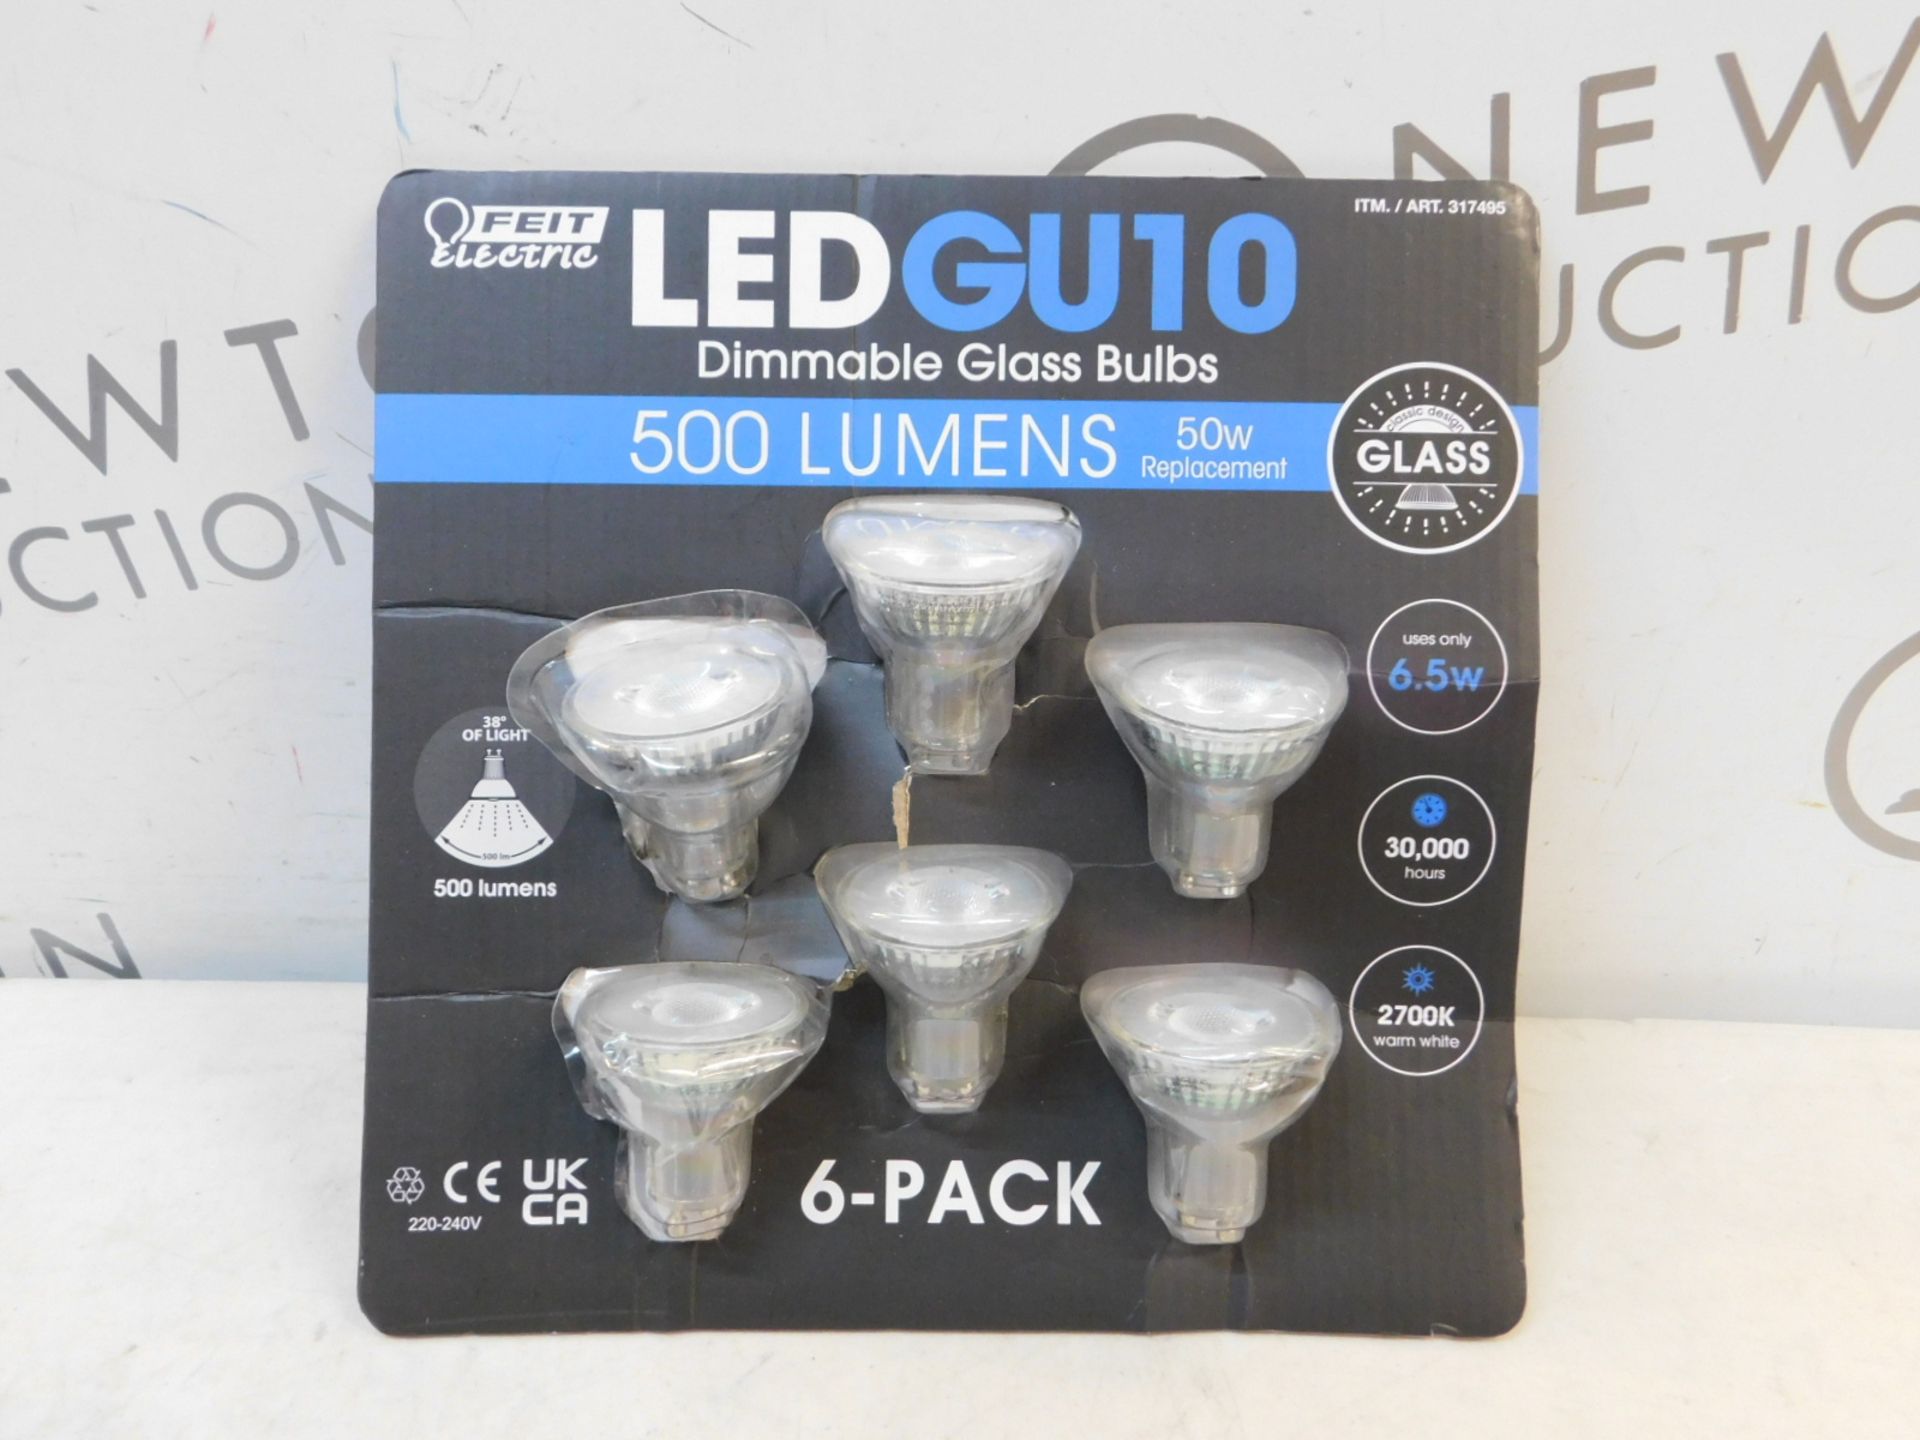 1 PACK OF 6 FEIT ELECTRIC GU10 LED DIMMABLE 50W REPLACEMENT BULBS RRP Â£19.99